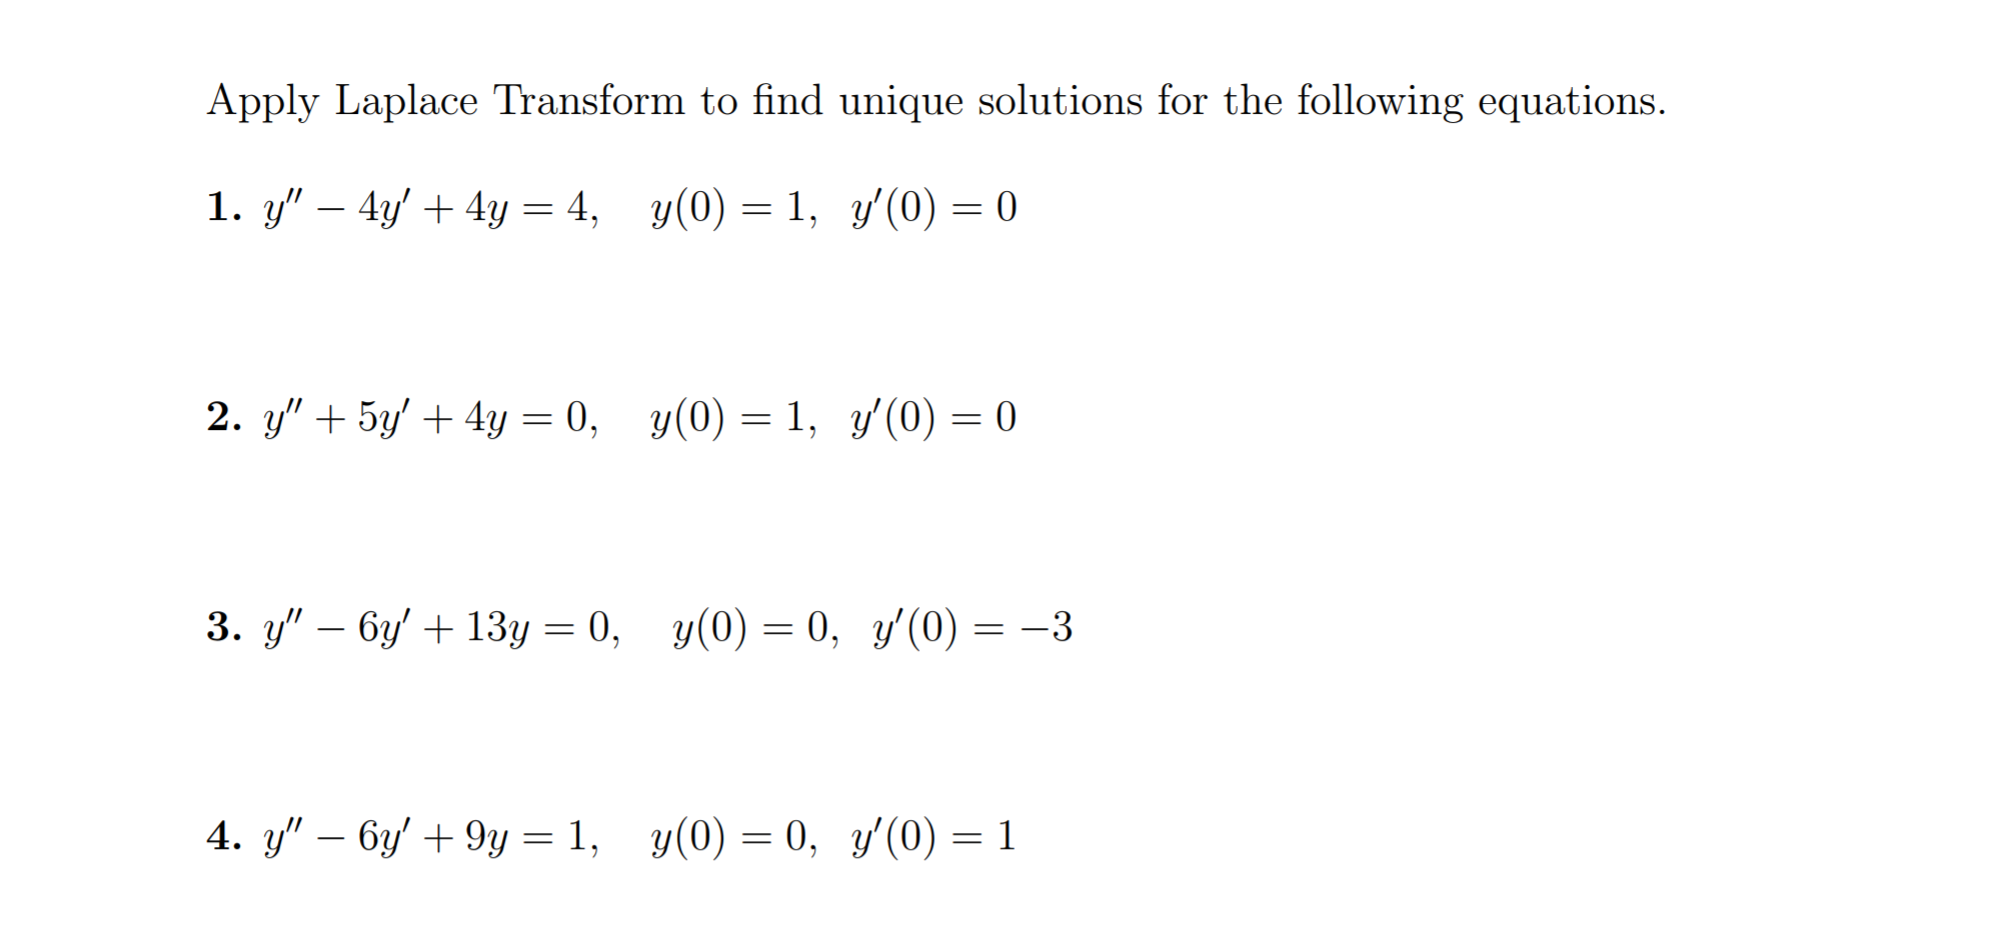 Apply Laplace Transform to find unique solutions for the following equations.
